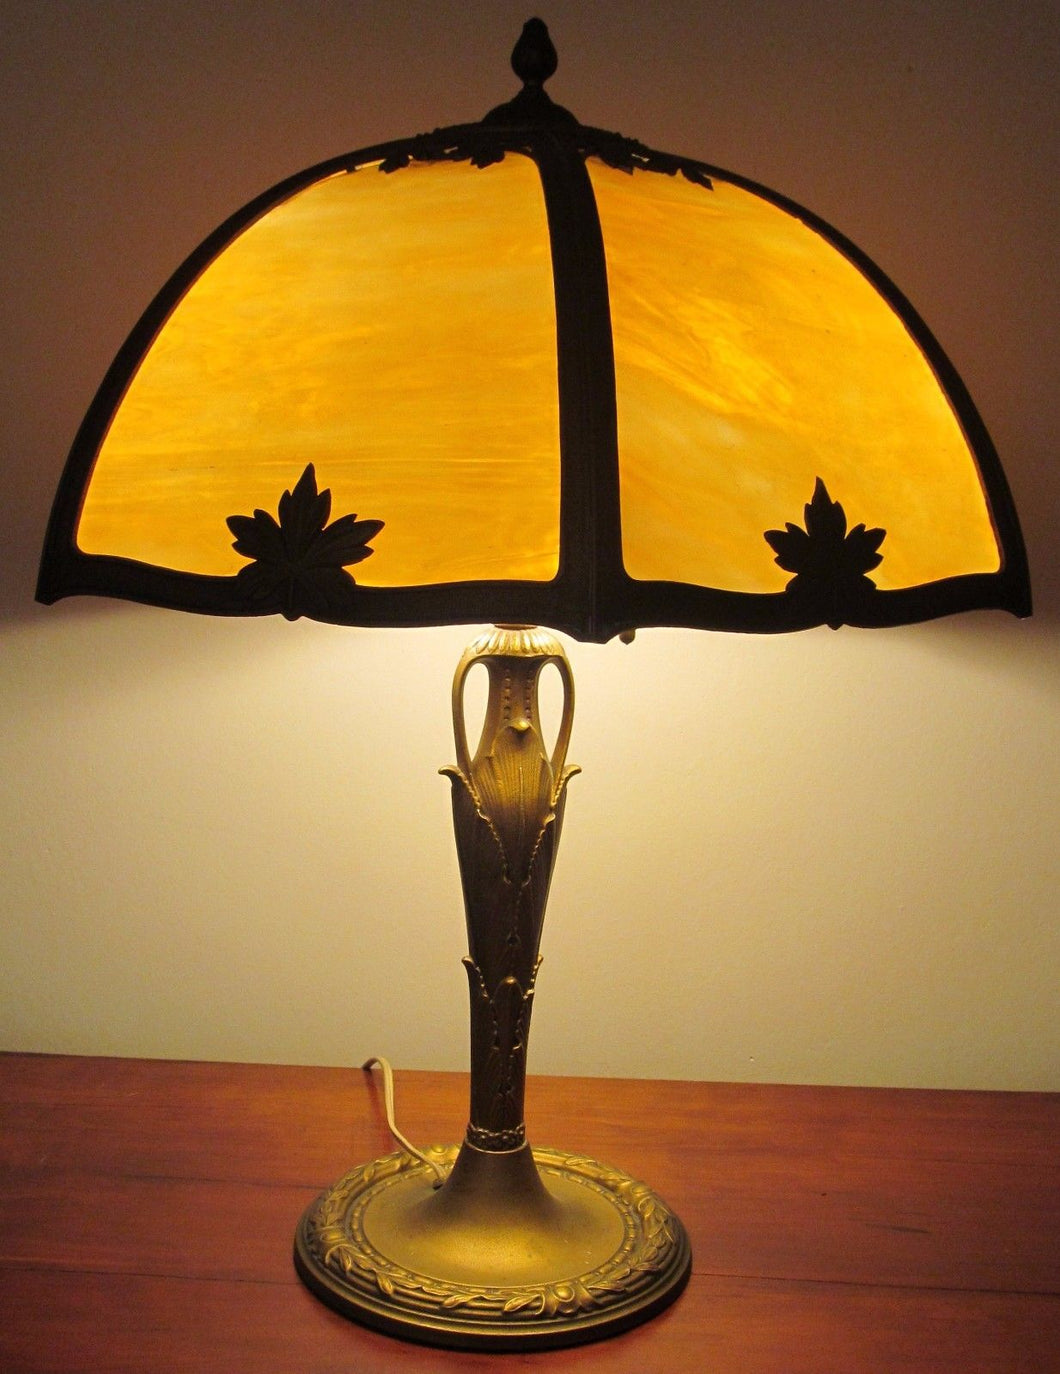 ARTS & CRAFTS MILLER TABLE LAMP WITH CARAMEL COLORED 6 PANEL FILIGREE SHADE